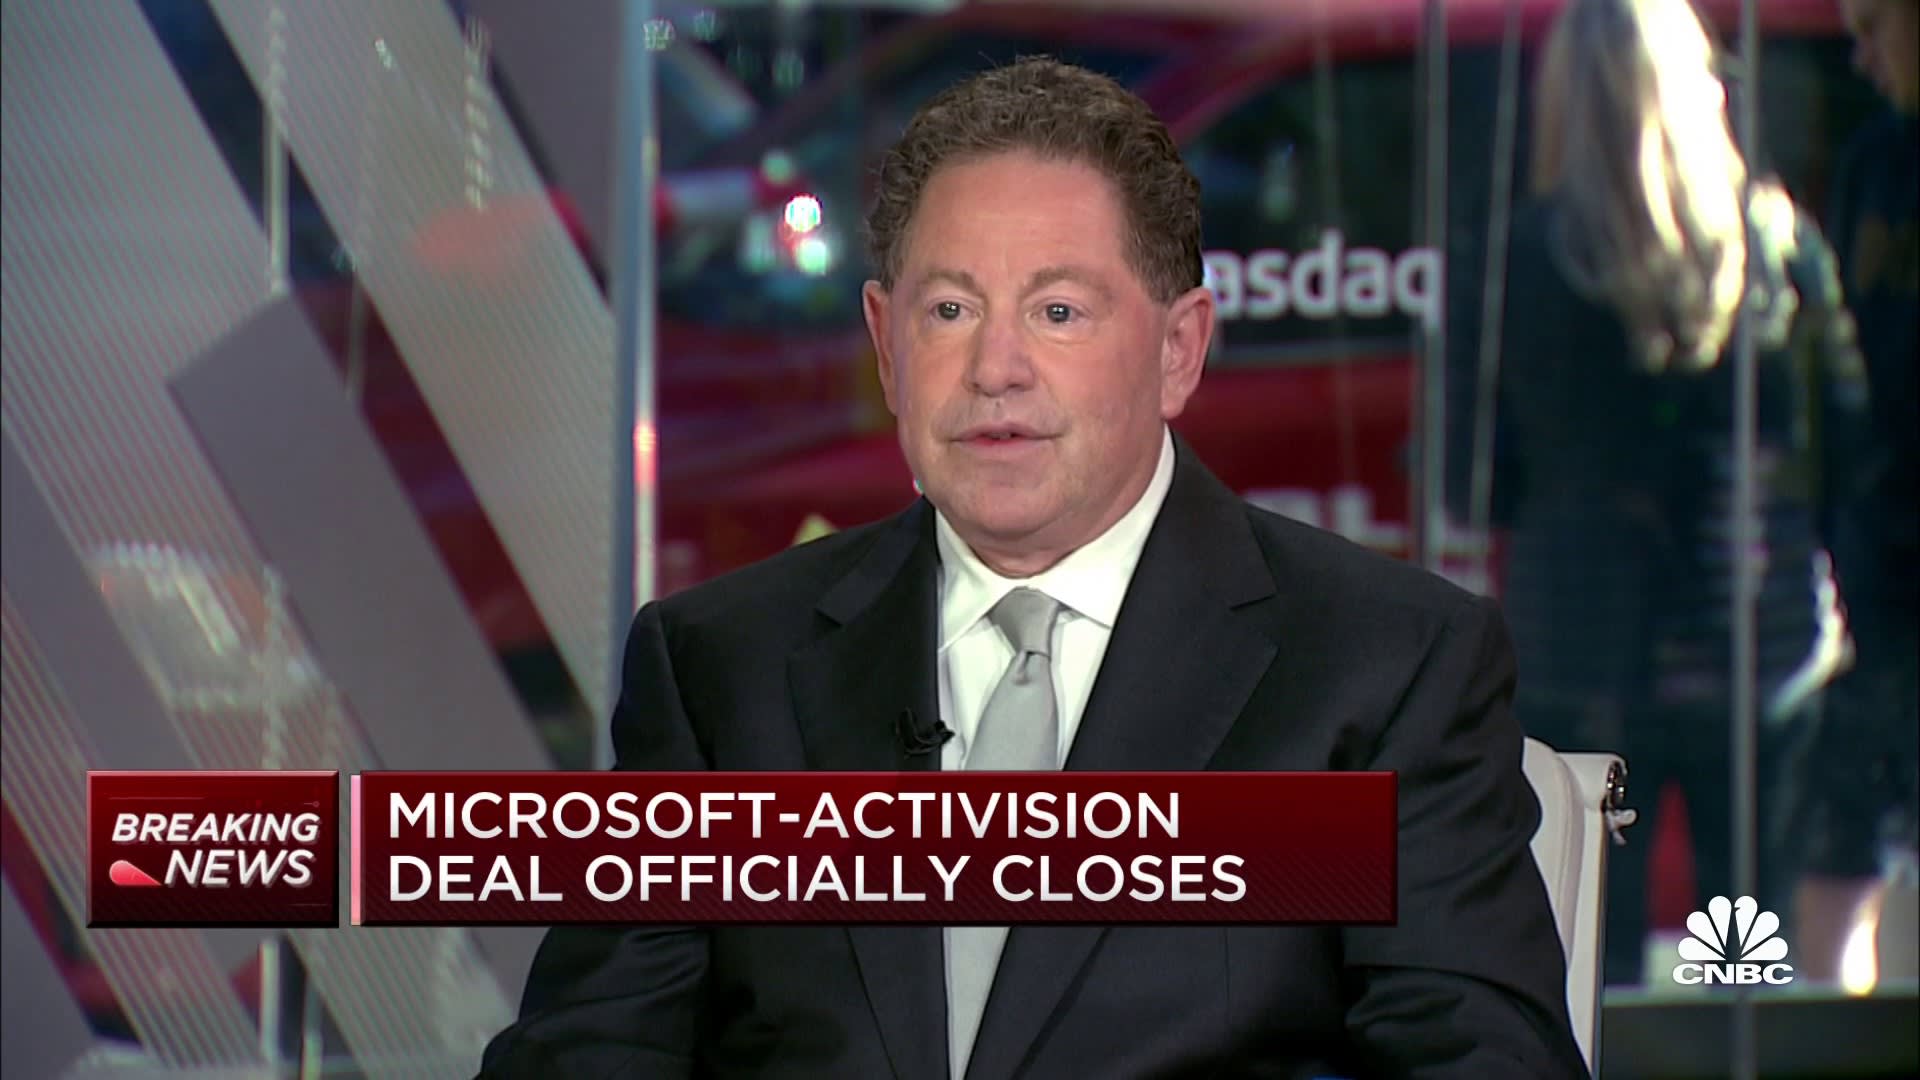 Eight Takeaways From the Microsoft-Activision Deal — The Information